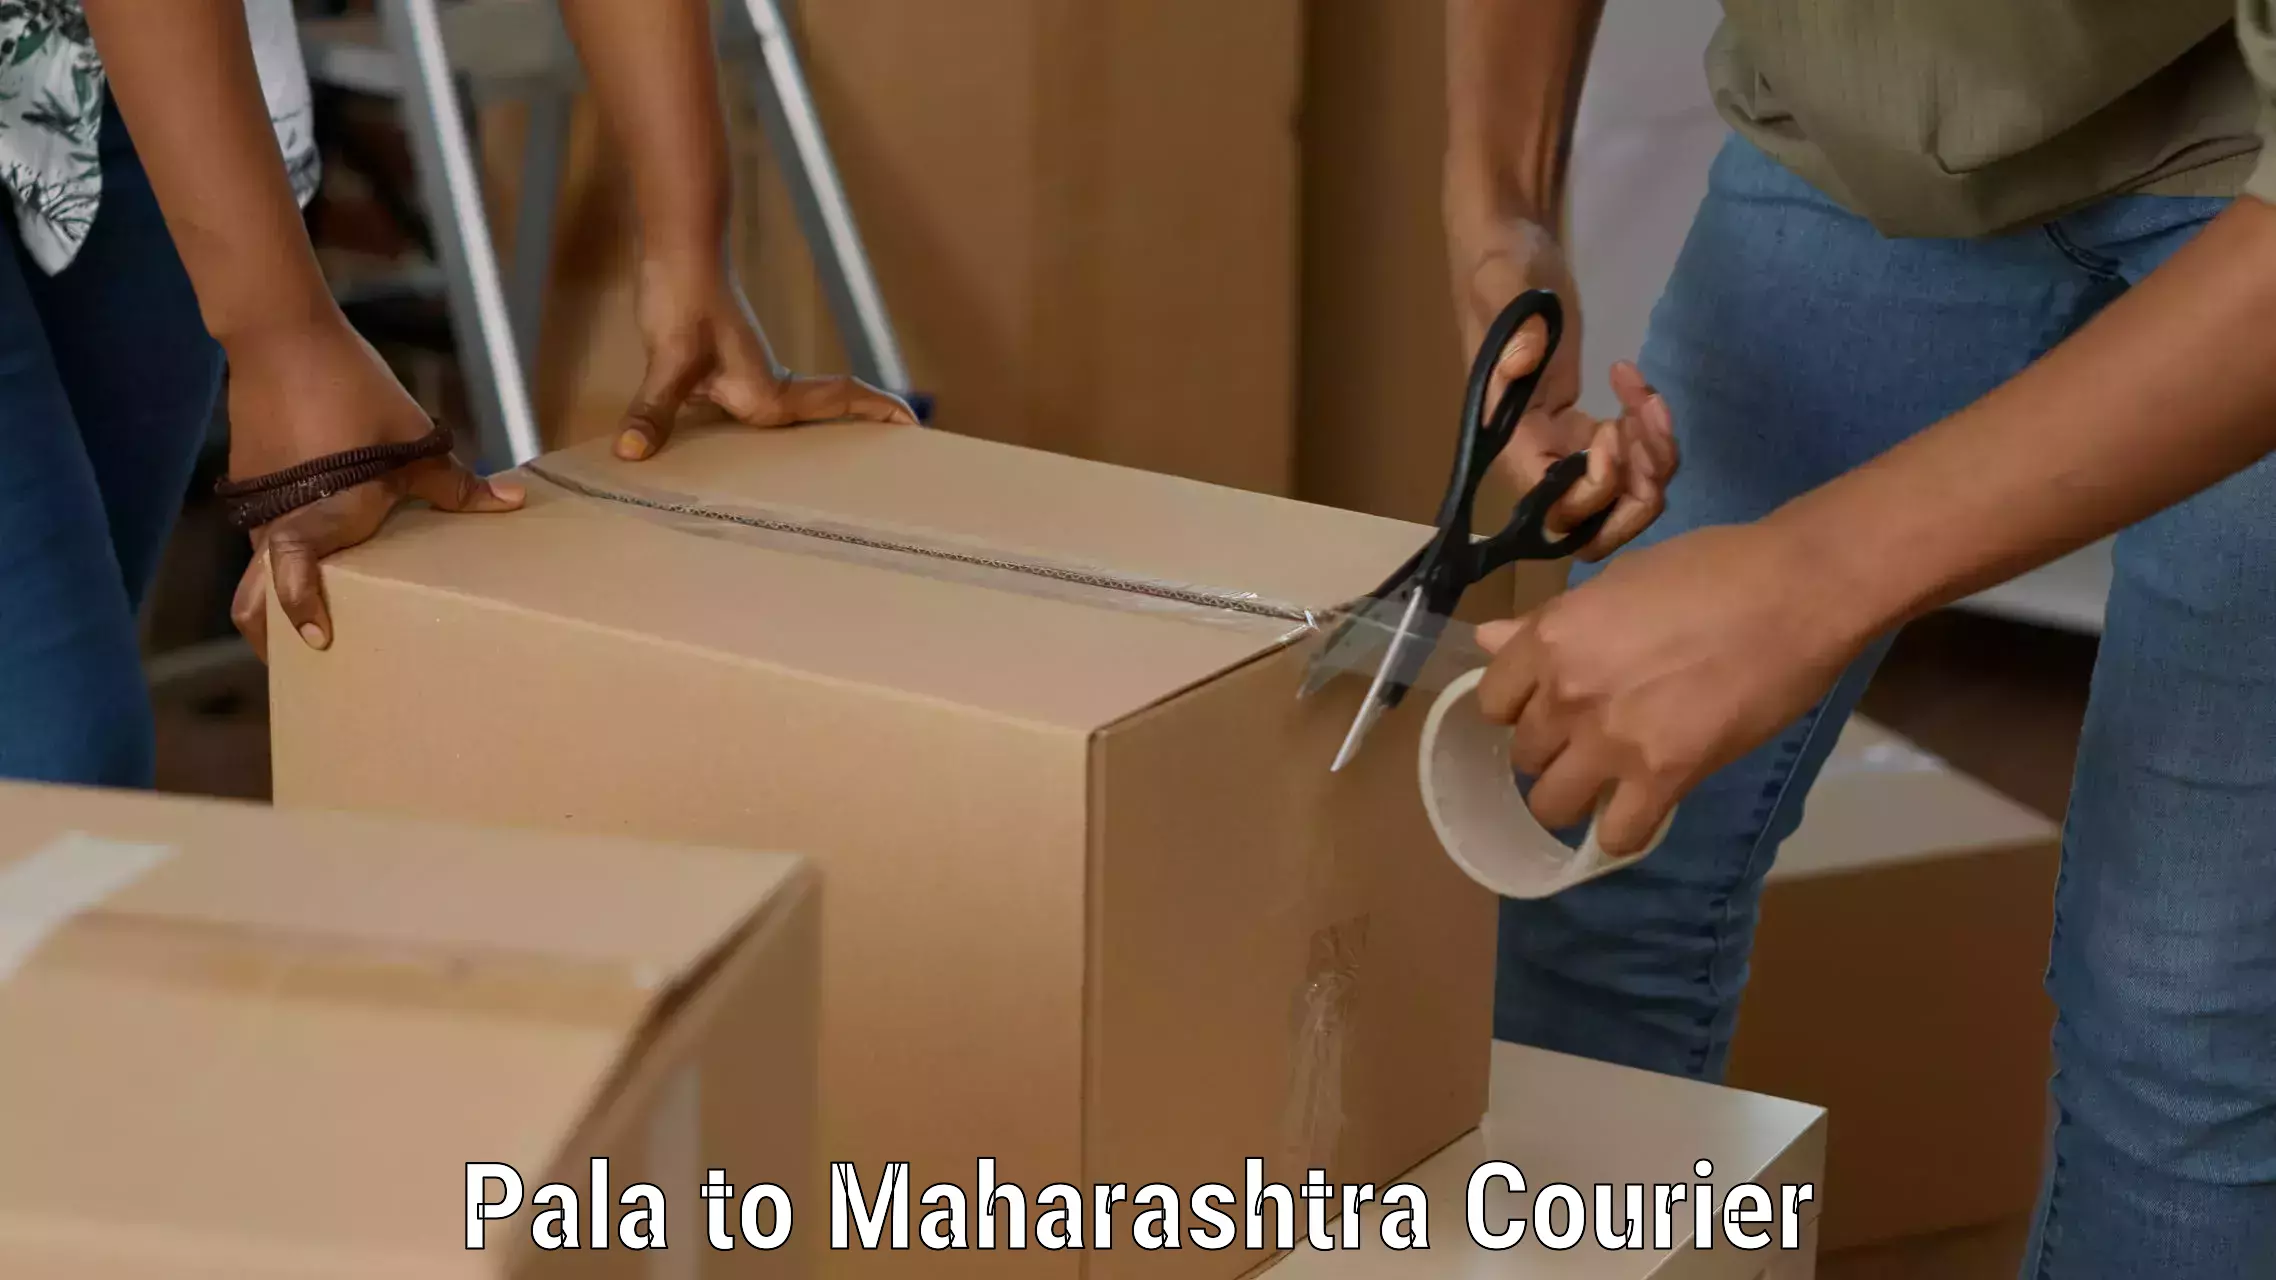 Expedited parcel delivery Pala to Mahabaleshwar